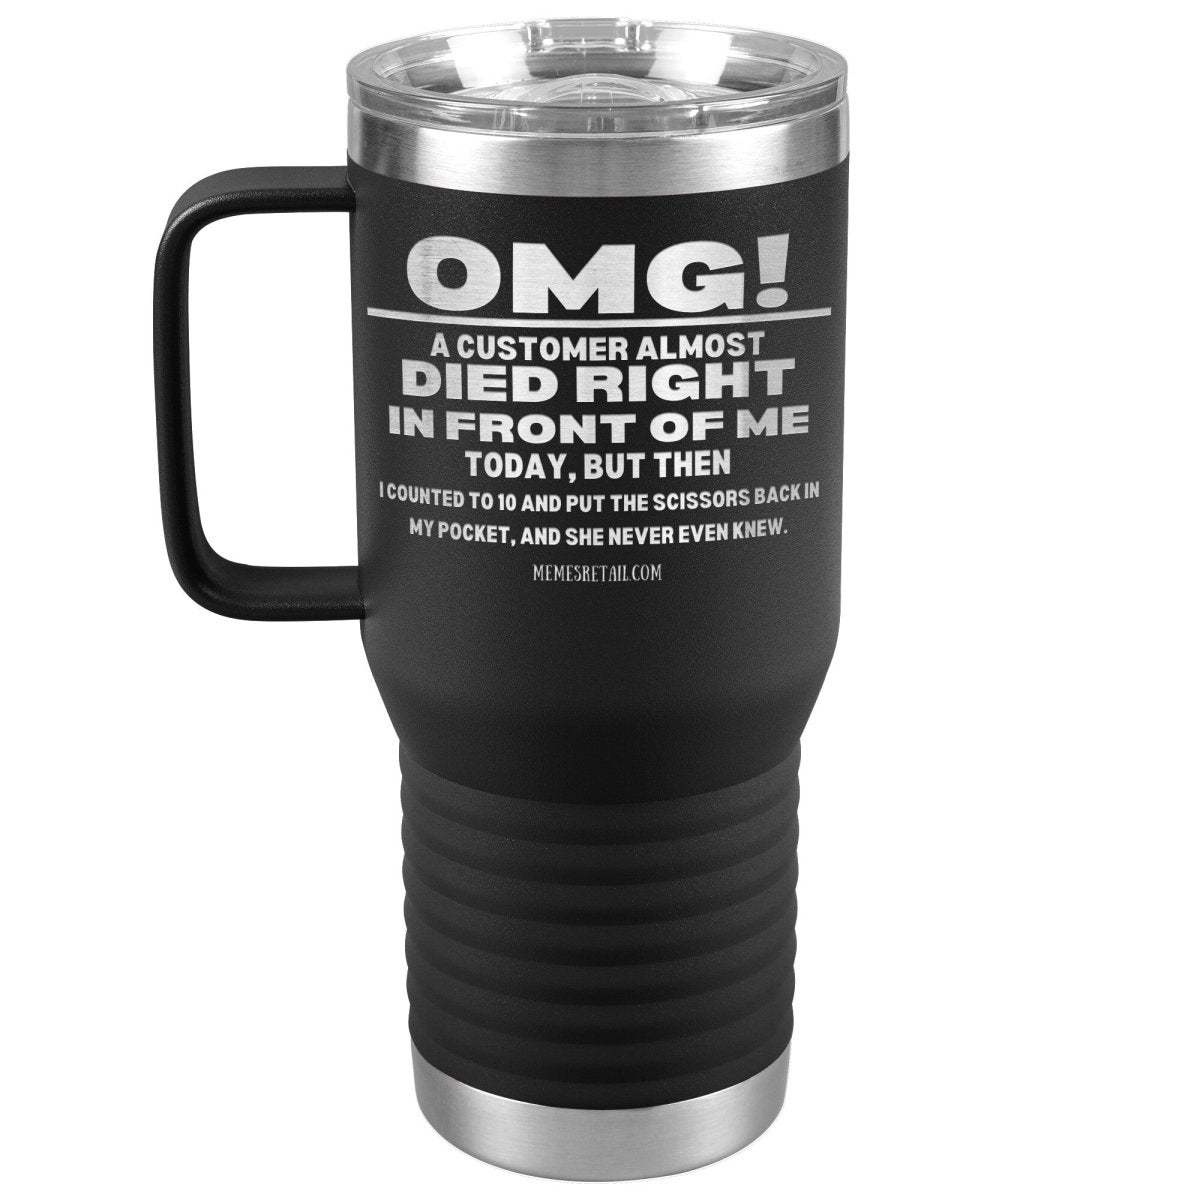 OMG! A Customer Almost Died Right In Front Of Me Tumbler, 20oz Travel Tumbler / Black - MemesRetail.com